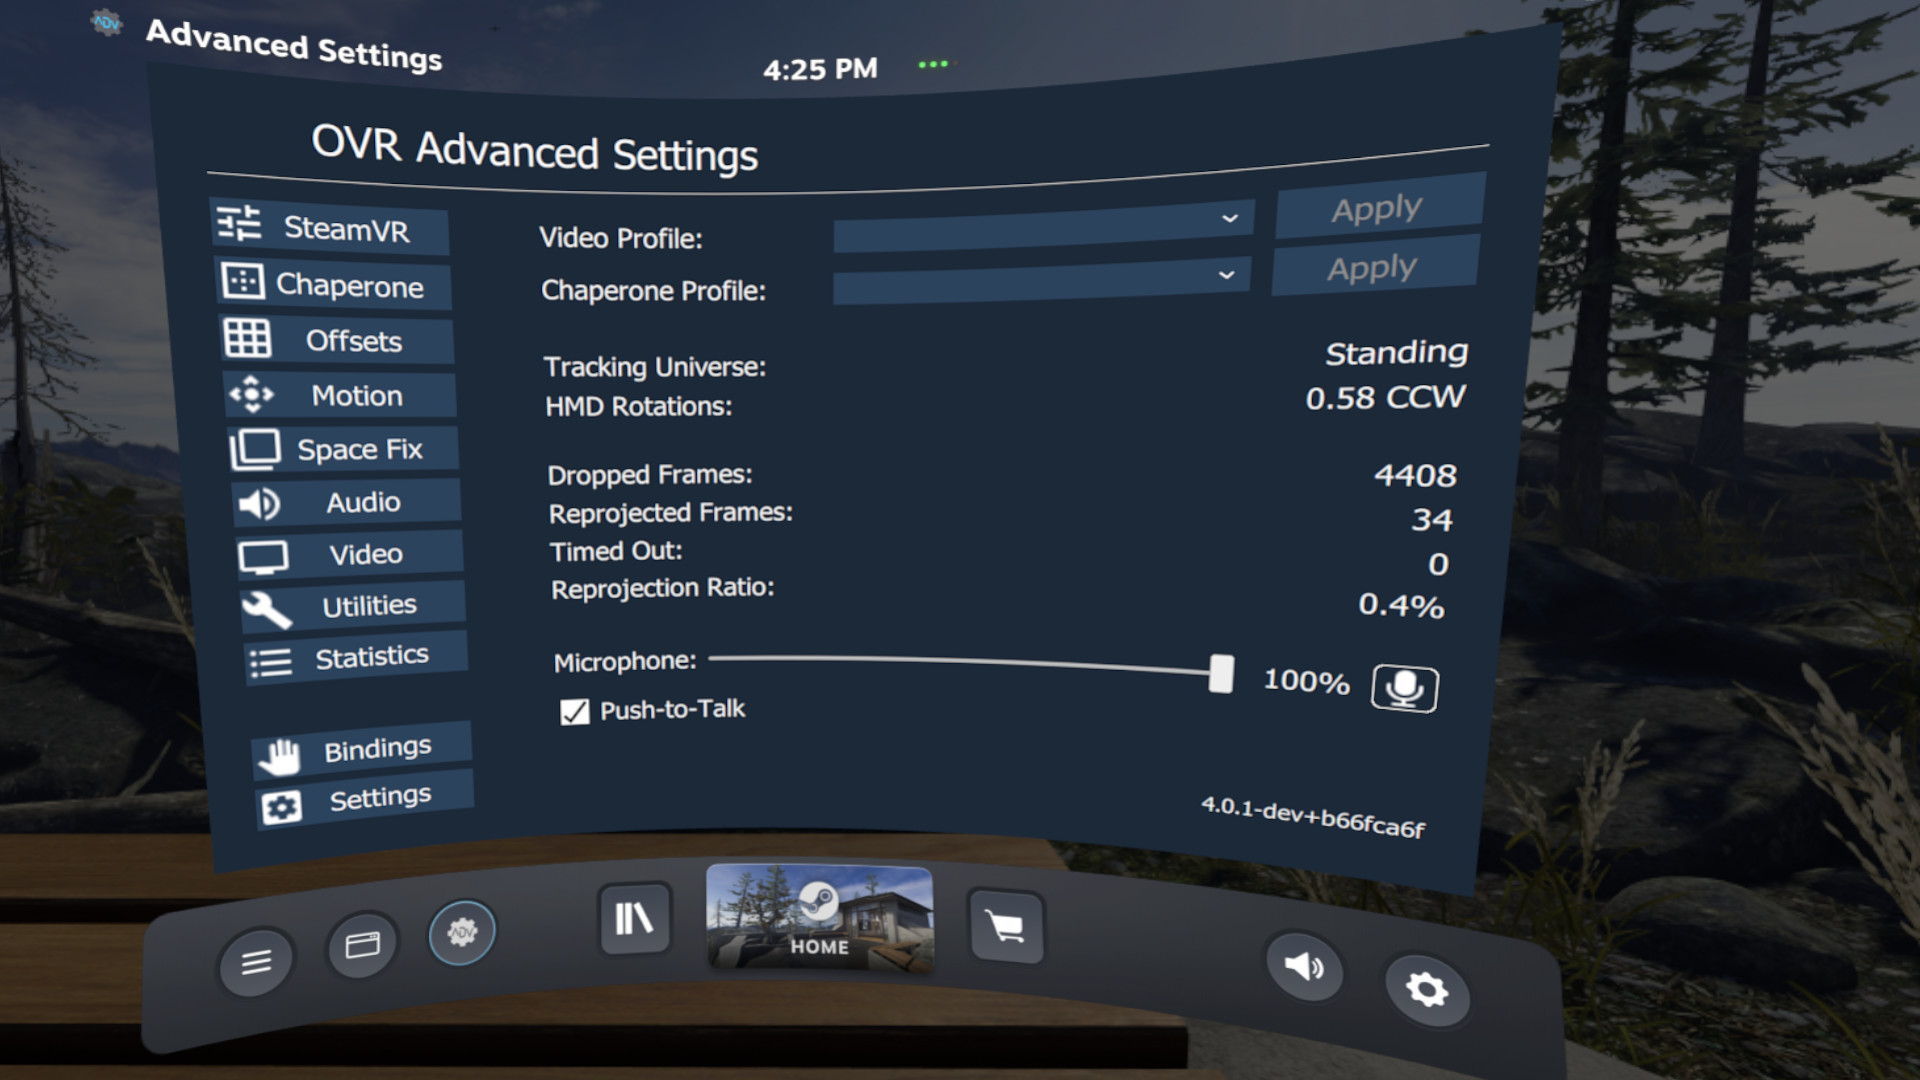 OpenVR Advanced Settings. Credits: Steam page